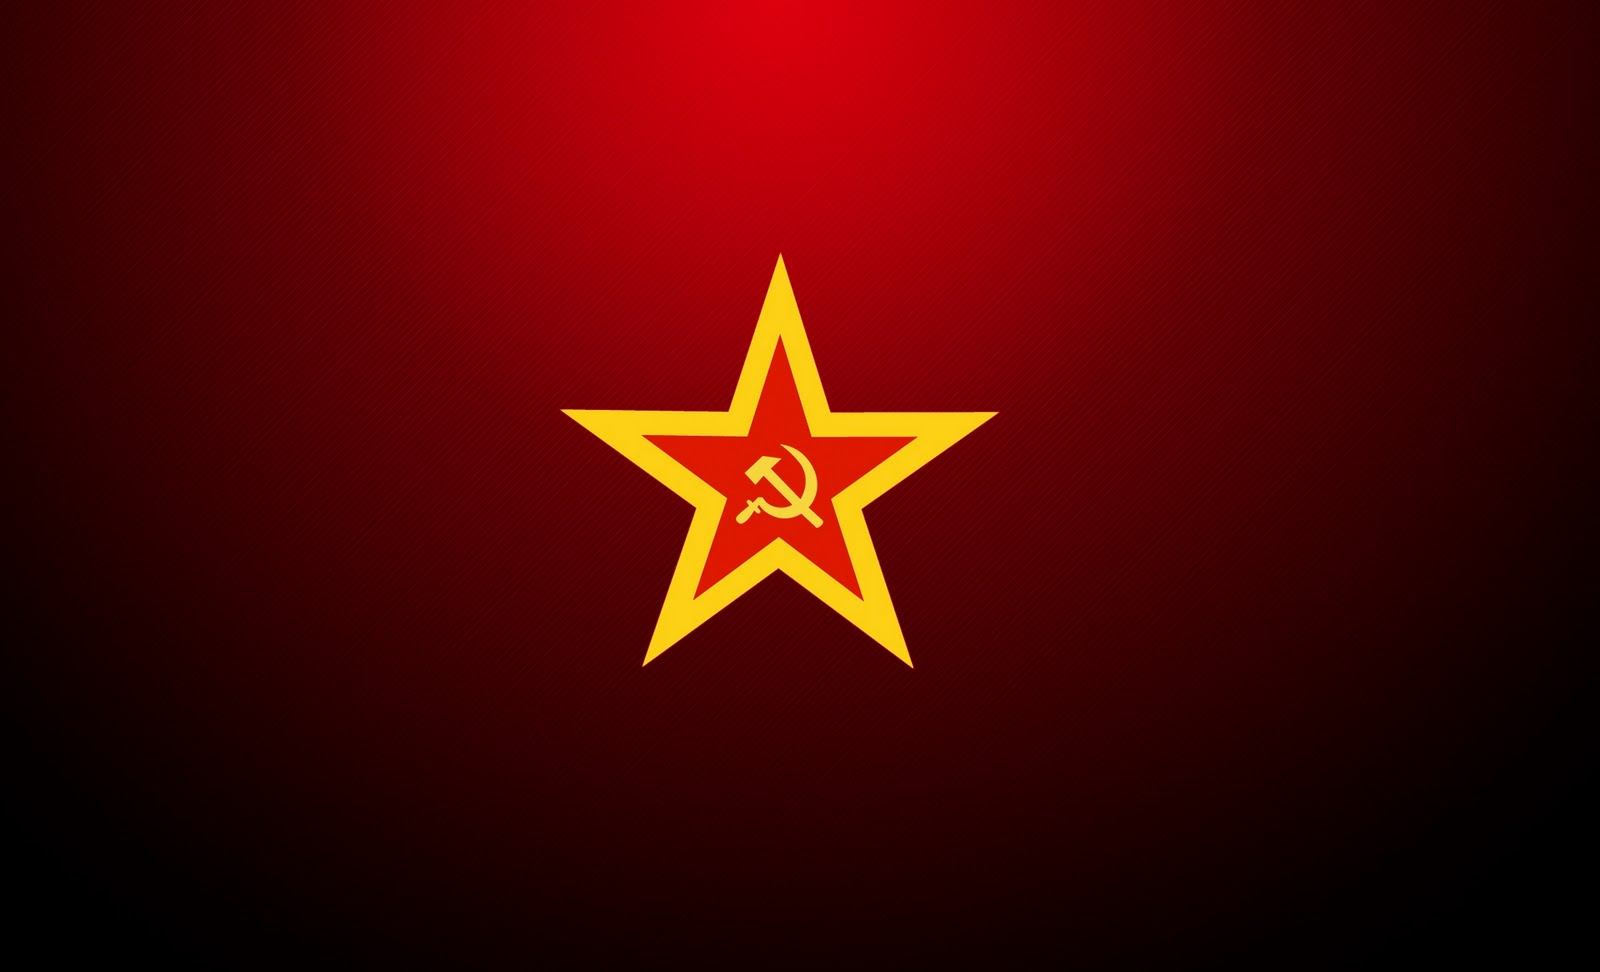 Wallpapers Box: Russia - Red Star HD Wallpapers